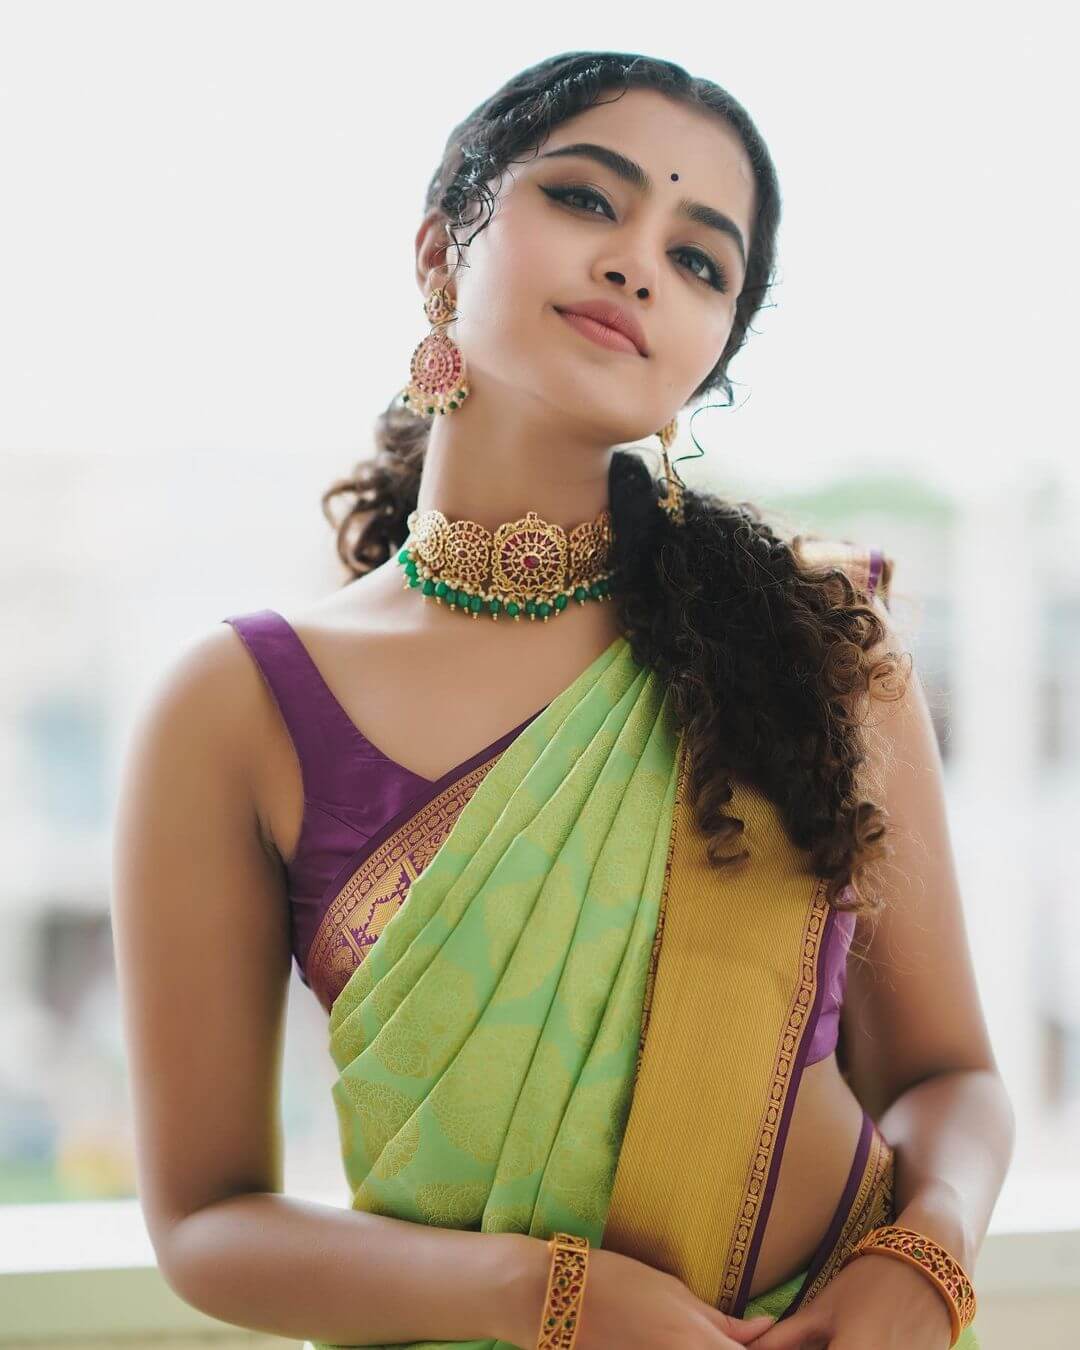 Anupama In Green Silk Saree With Gold Choker Can Be Your Festive Outfit Look Anupama Parameswaran Ethnic Outfit, Style and Looks